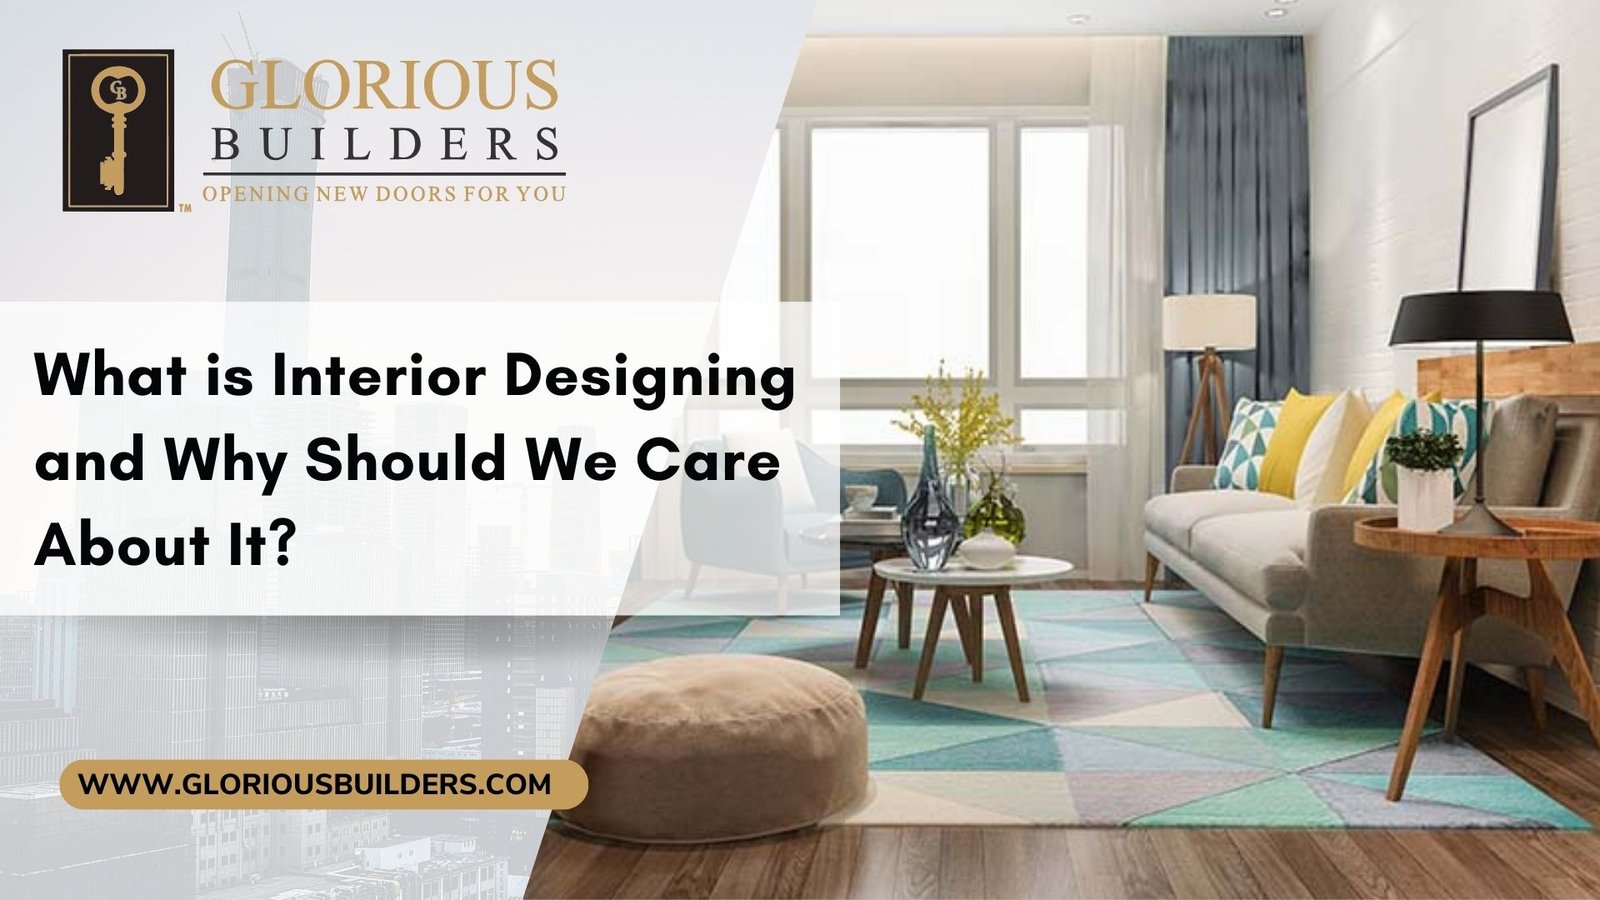 What is Interior Designing and Why Should We Care About It